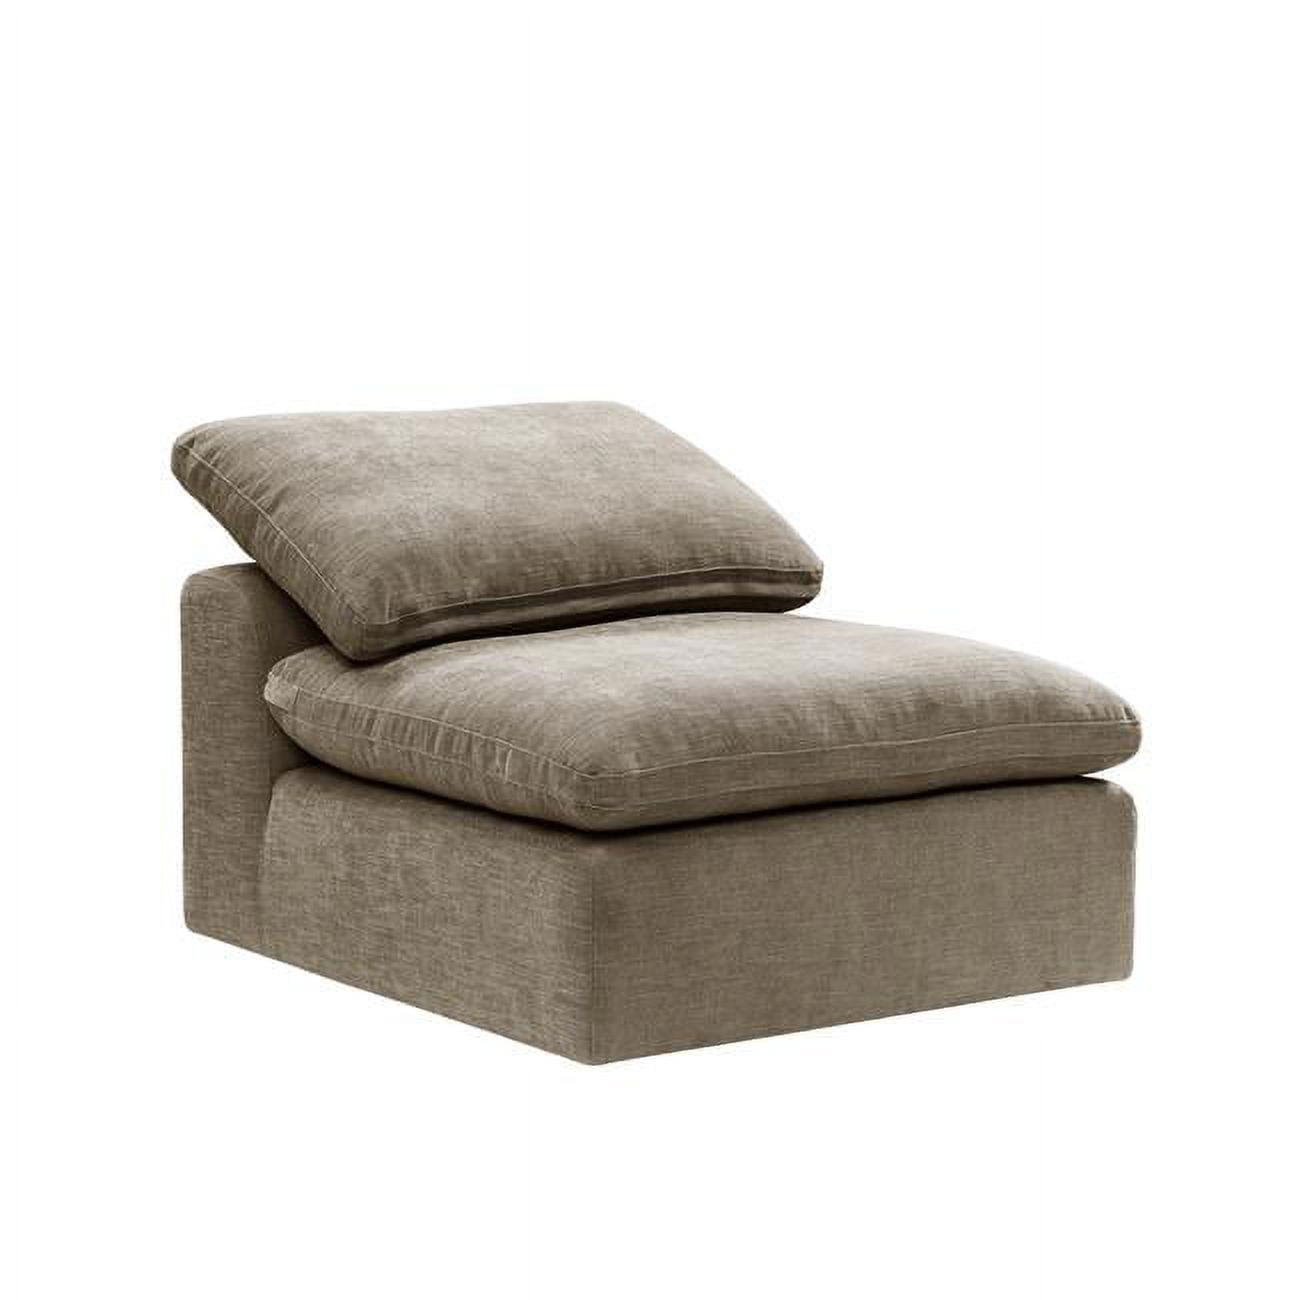 Picture of Acme Furniture LV01106 38 x 45 x 24 in. Naveen Modular Armless Chair, Khaki Linen